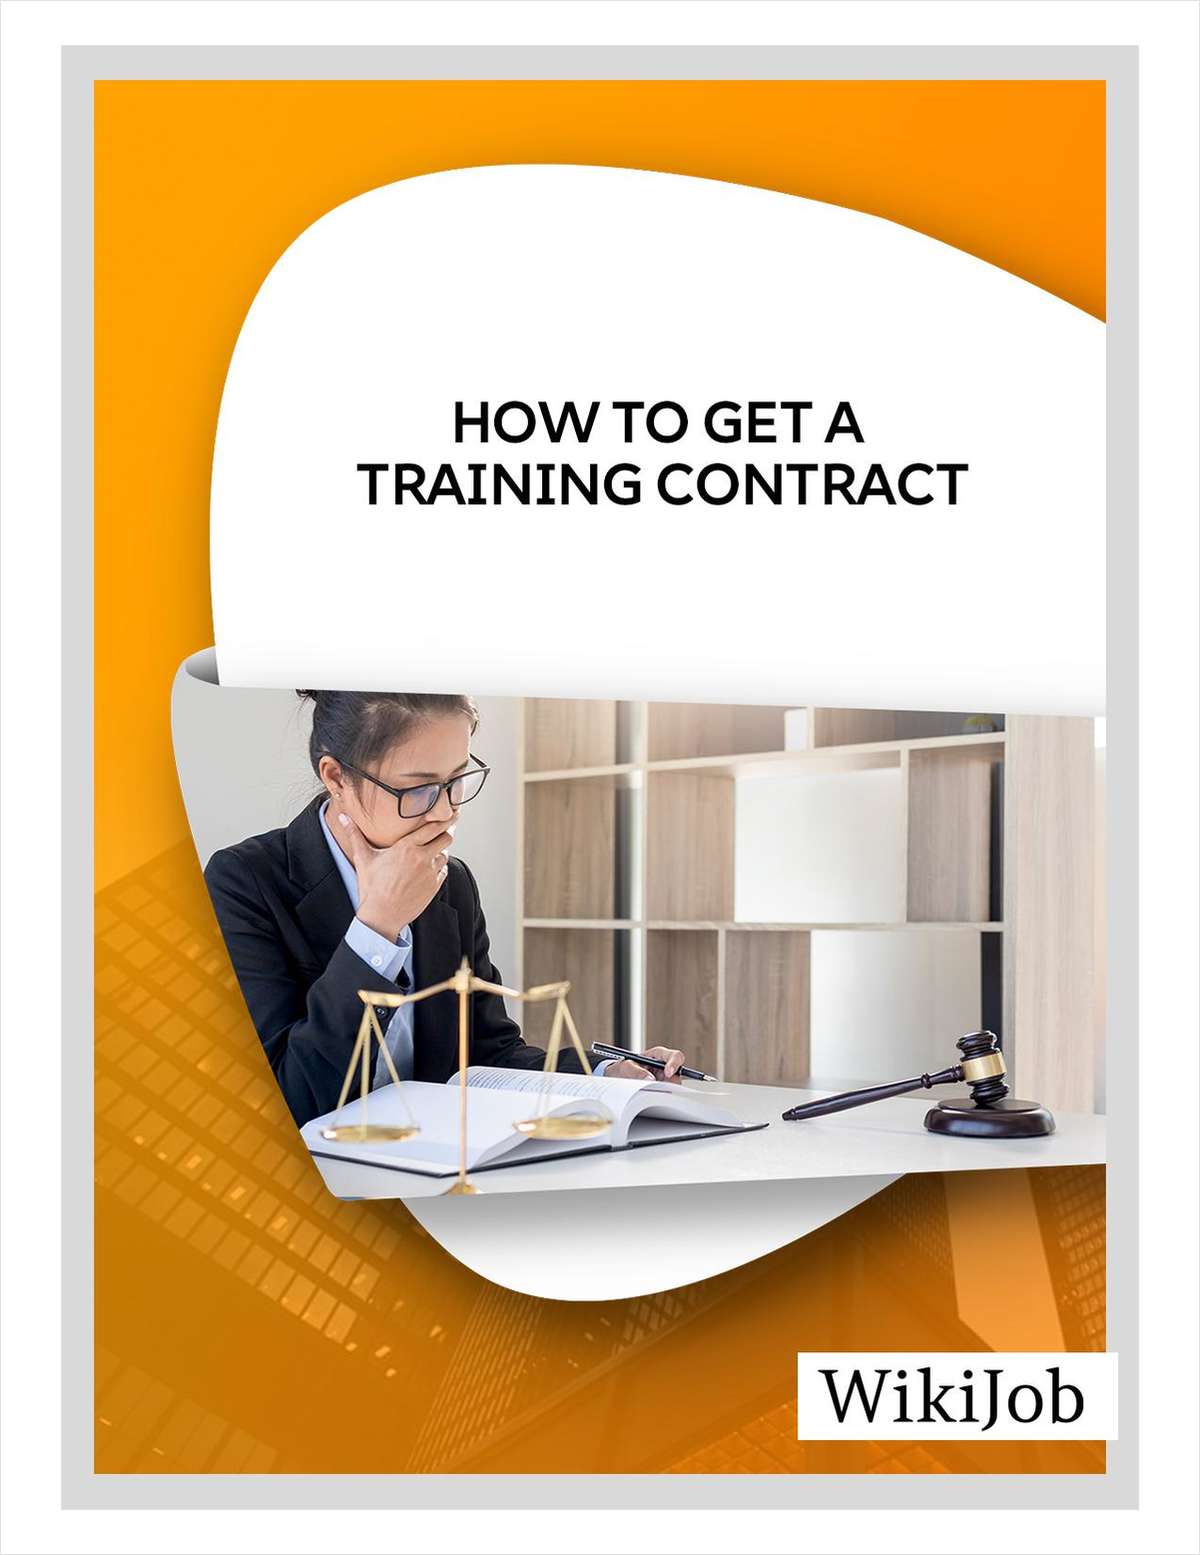 How to Get a Training Contract